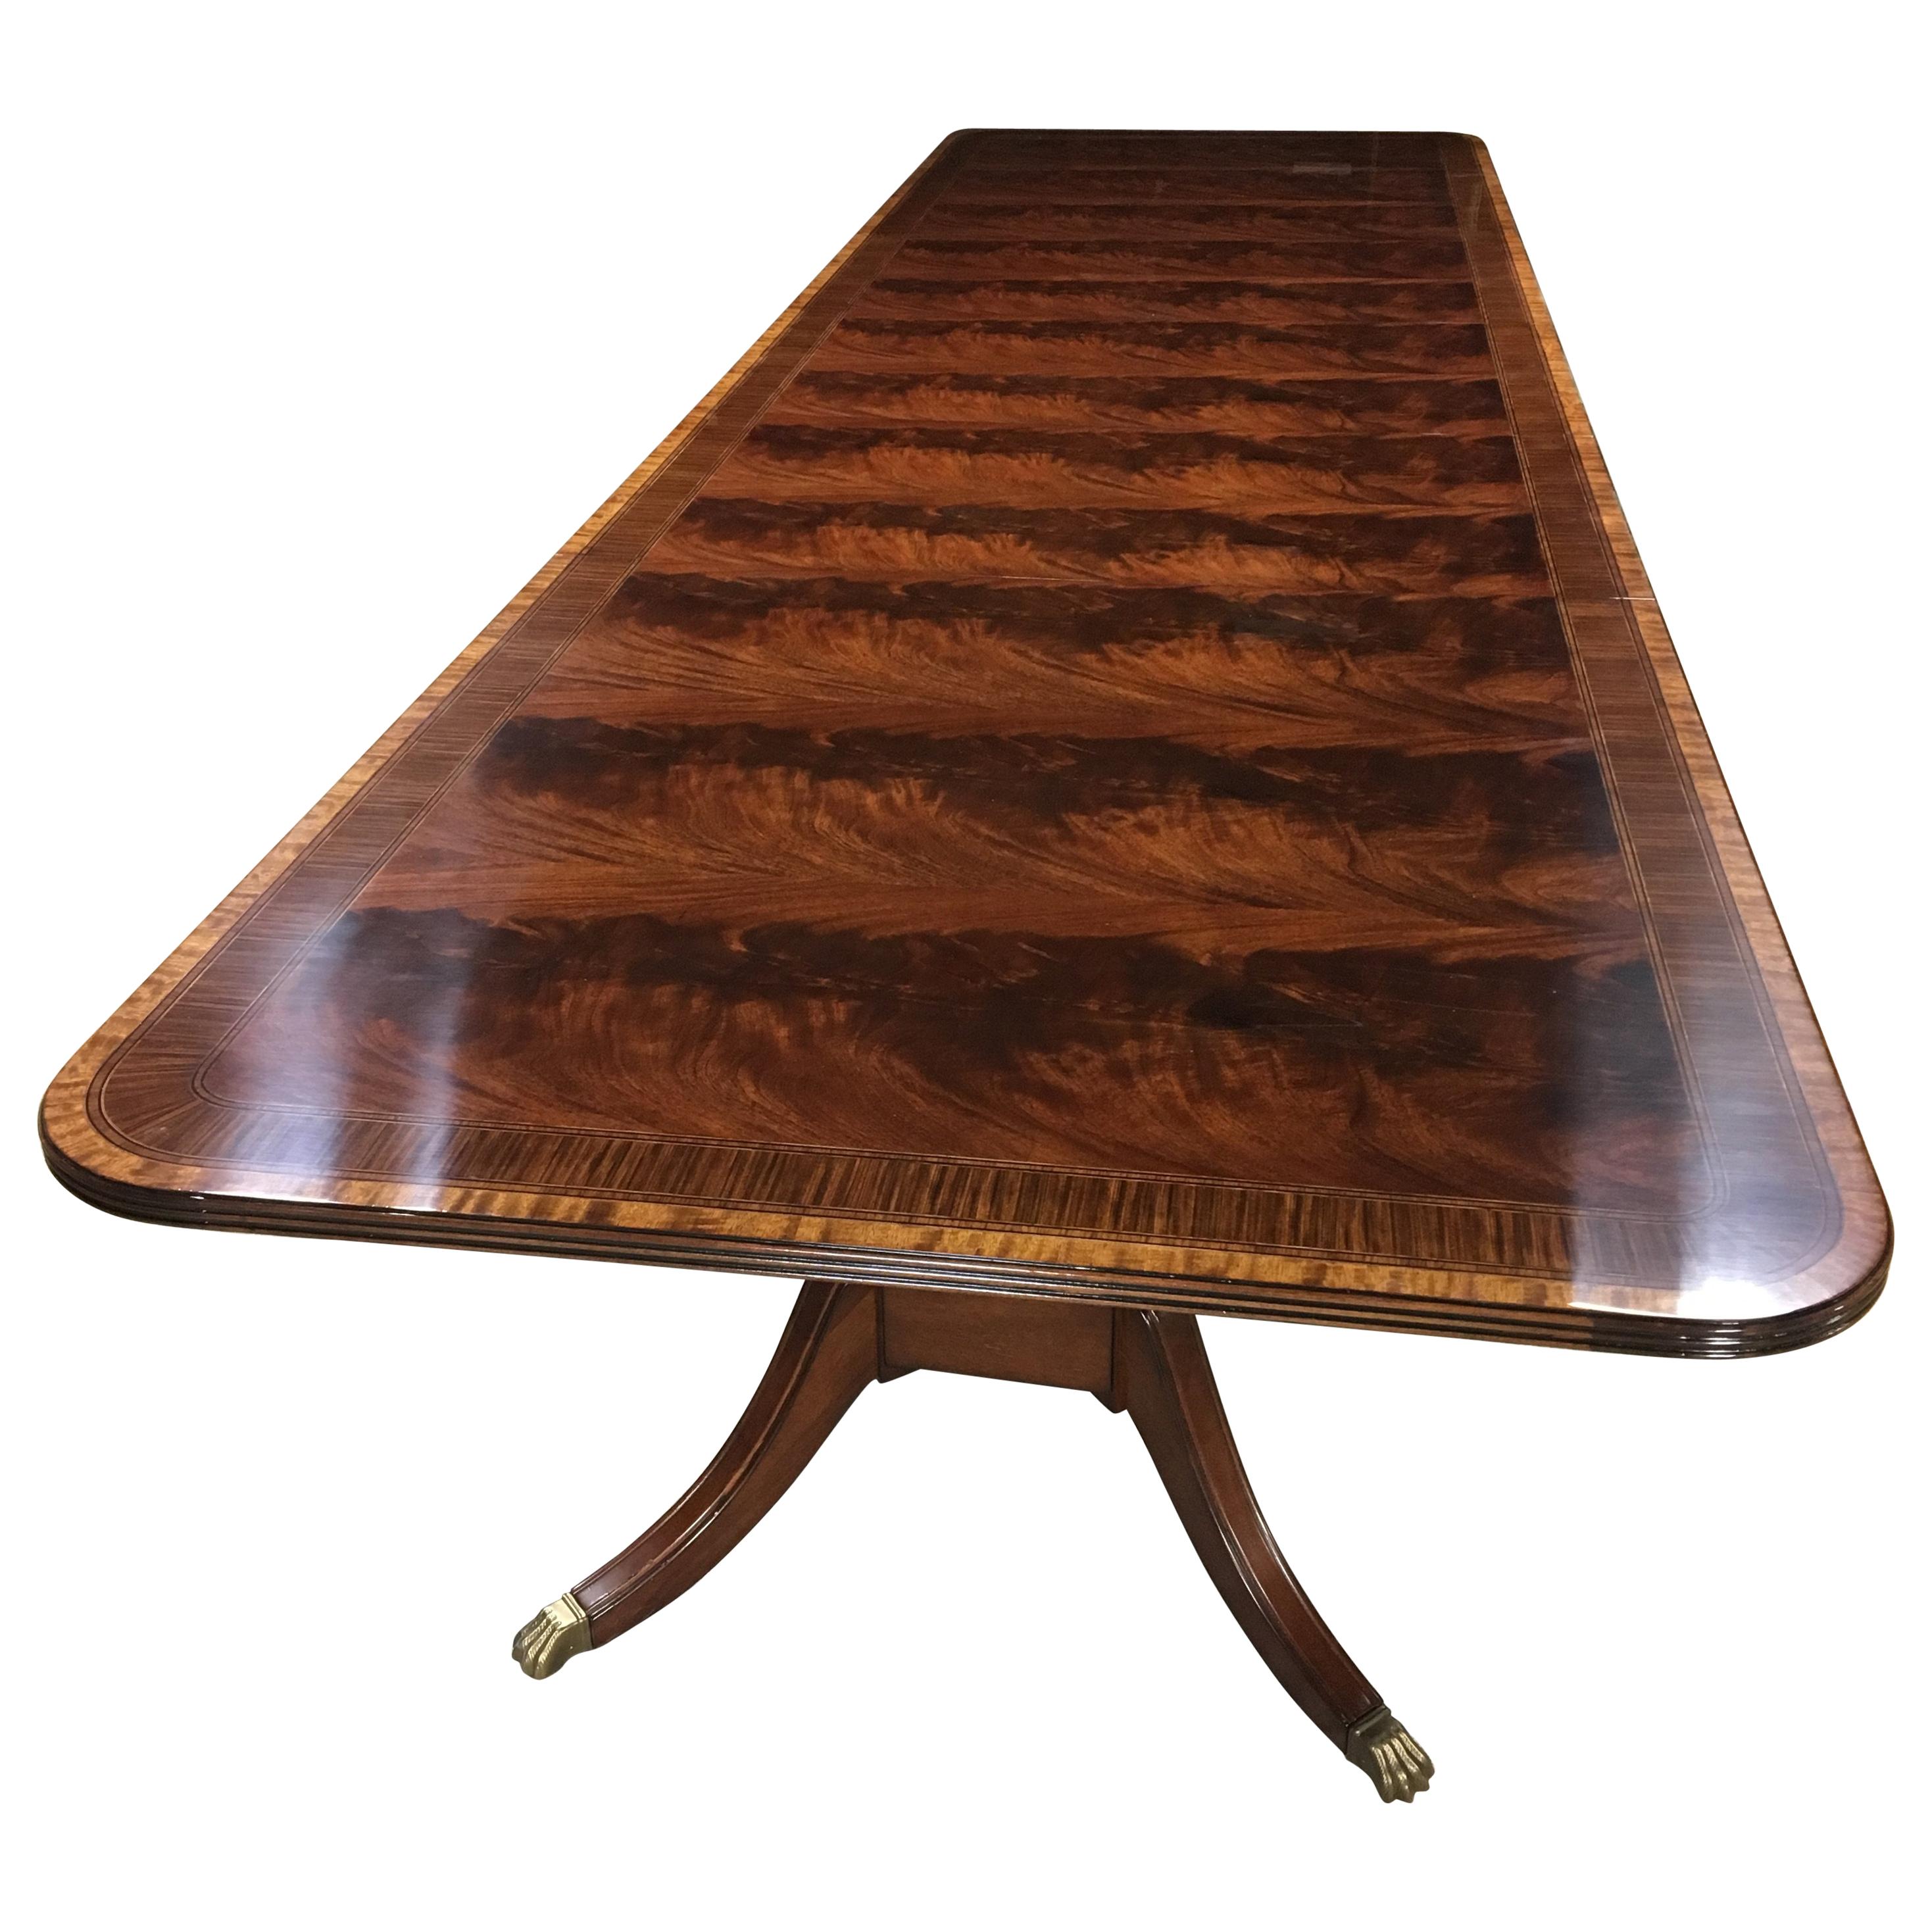 Multi-Banded 14 Ft. Mahogany Regency Style Dining Table by Leighton Hall